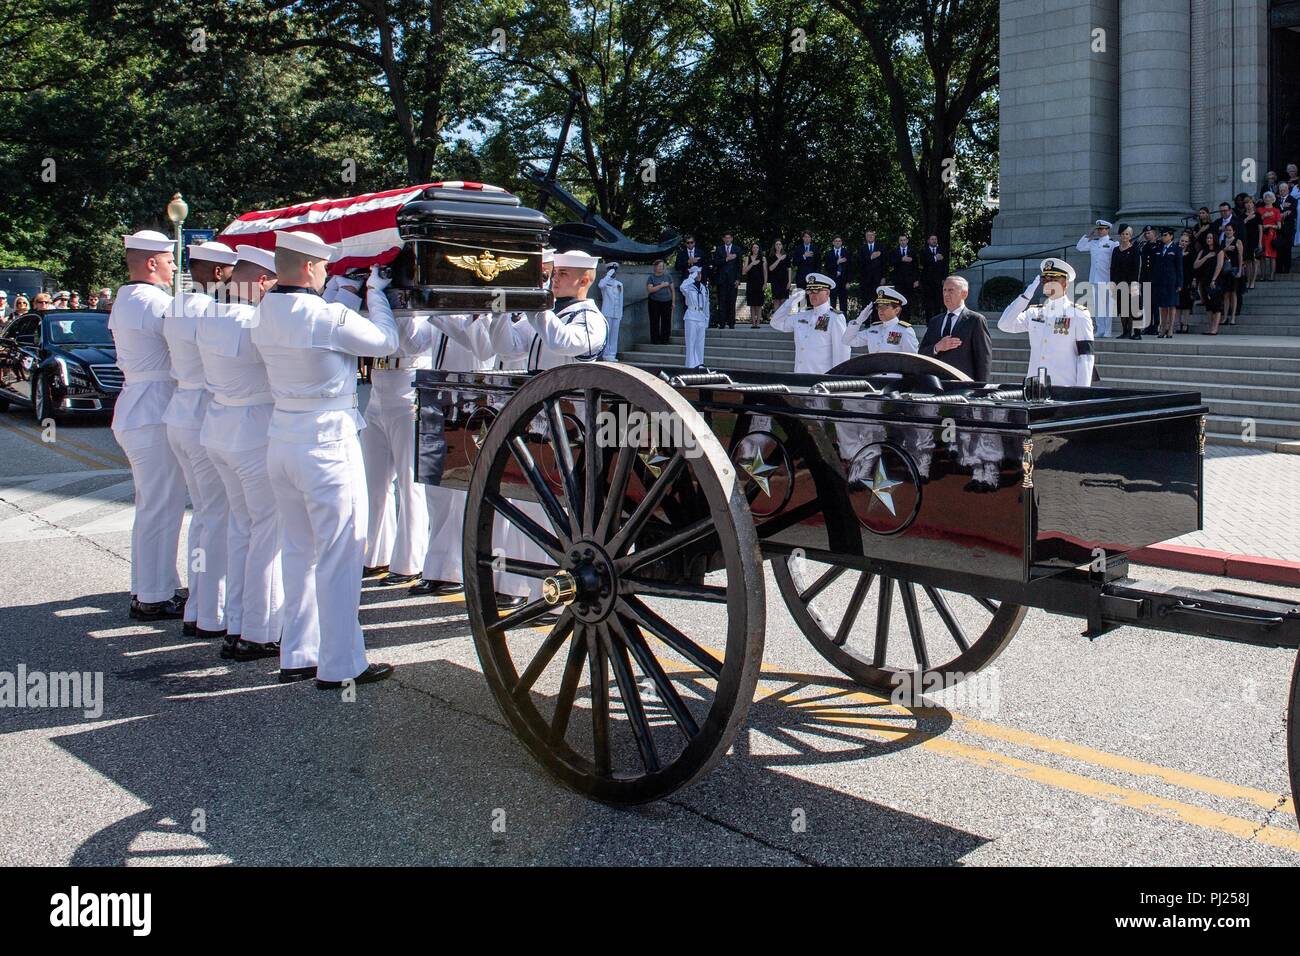 The flag draped casket of Sen. John McCain is lifted by Midshipmen on to a horse-drawn caisson for the procession to the United States Naval Academy Cemetery for his burial service September 2, 2018 in Annapolis, Maryland. John S. McCain, III graduated from the United States Naval Academy in 1958. He was a pilot in the United States Navy, a prisoner of war in Vietnam, a Congressmen and Senator and twice presidential candidate. He received numerous awards, including the Silver Star, Legion of Merit, Purple Heart, and Distinguished Flying Cross. Stock Photo